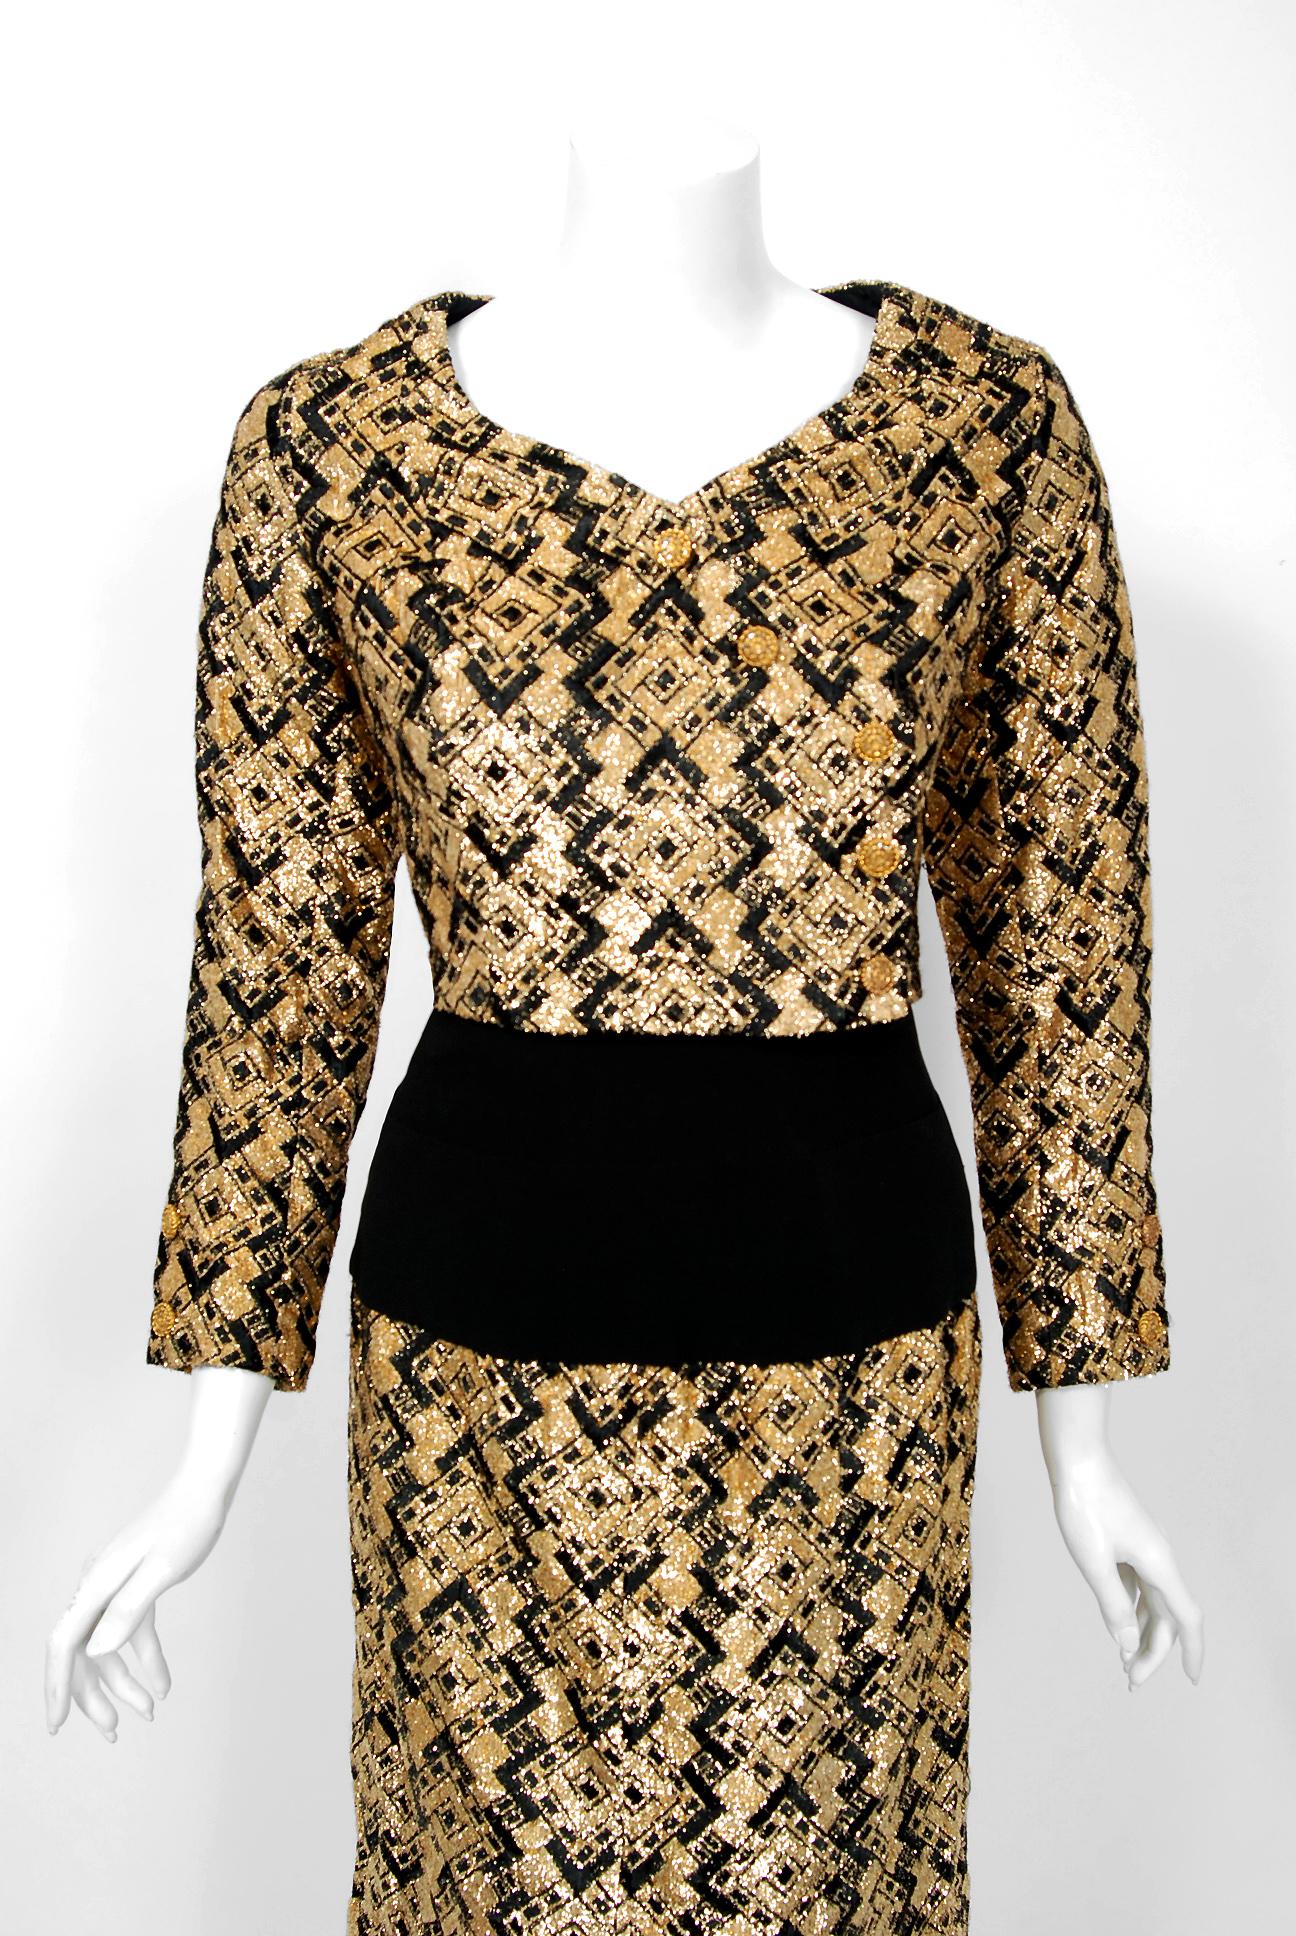 Chanel is known to be one of the most luxurious and decadent fashion houses in the world. This breathtaking metallic-gold and black deco graphic silk brocade ensemble from her 1970 Fall/Winter collection is a perfect example of why this couture